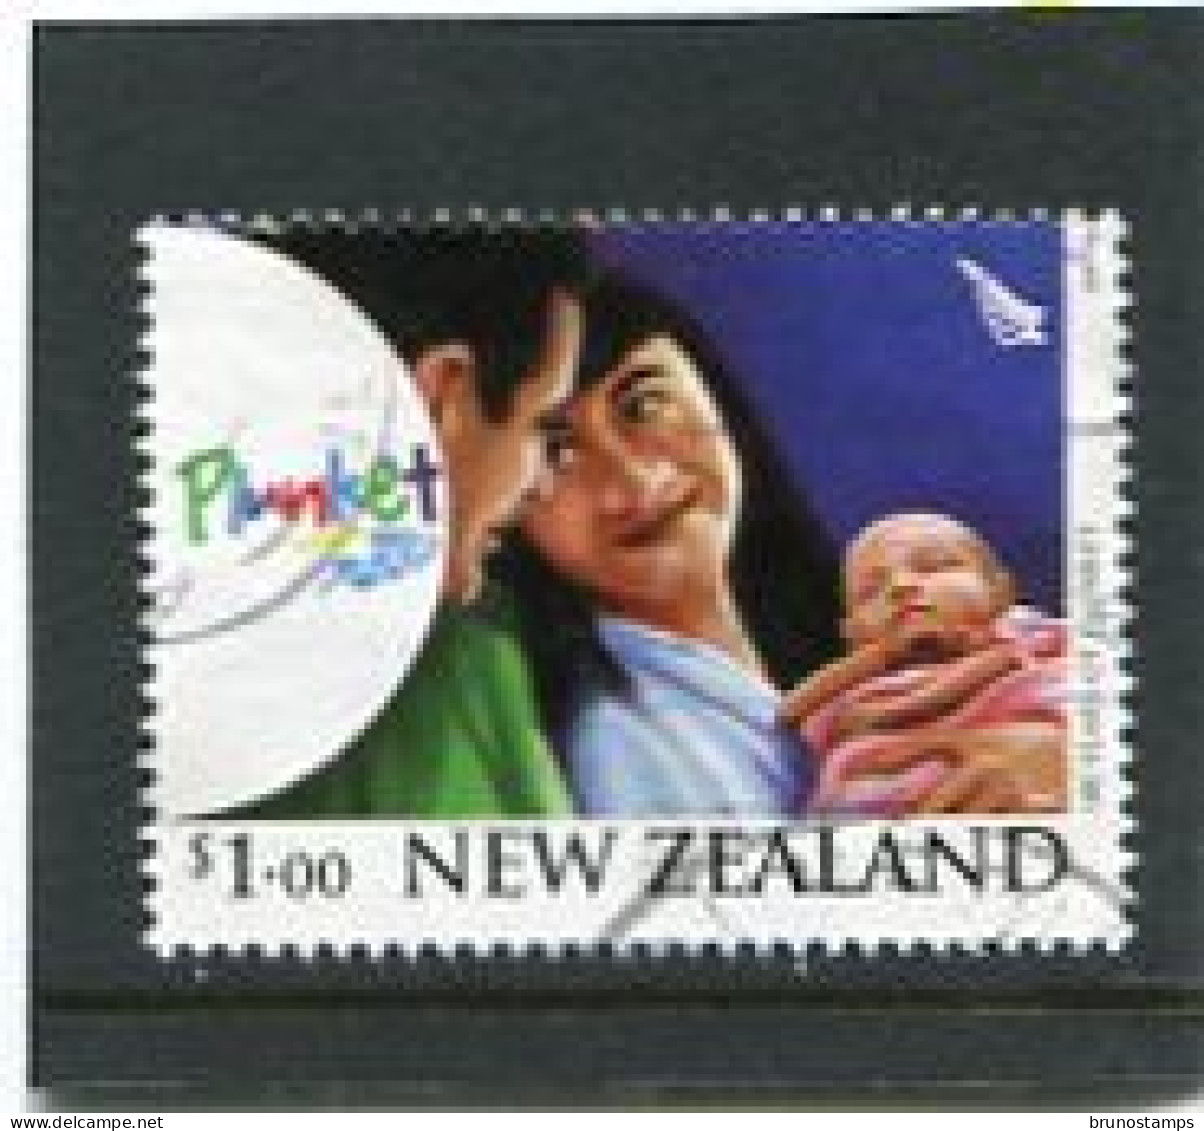 NEW ZEALAND - 2007  1$  RUGBY  FINE  USED - Usati